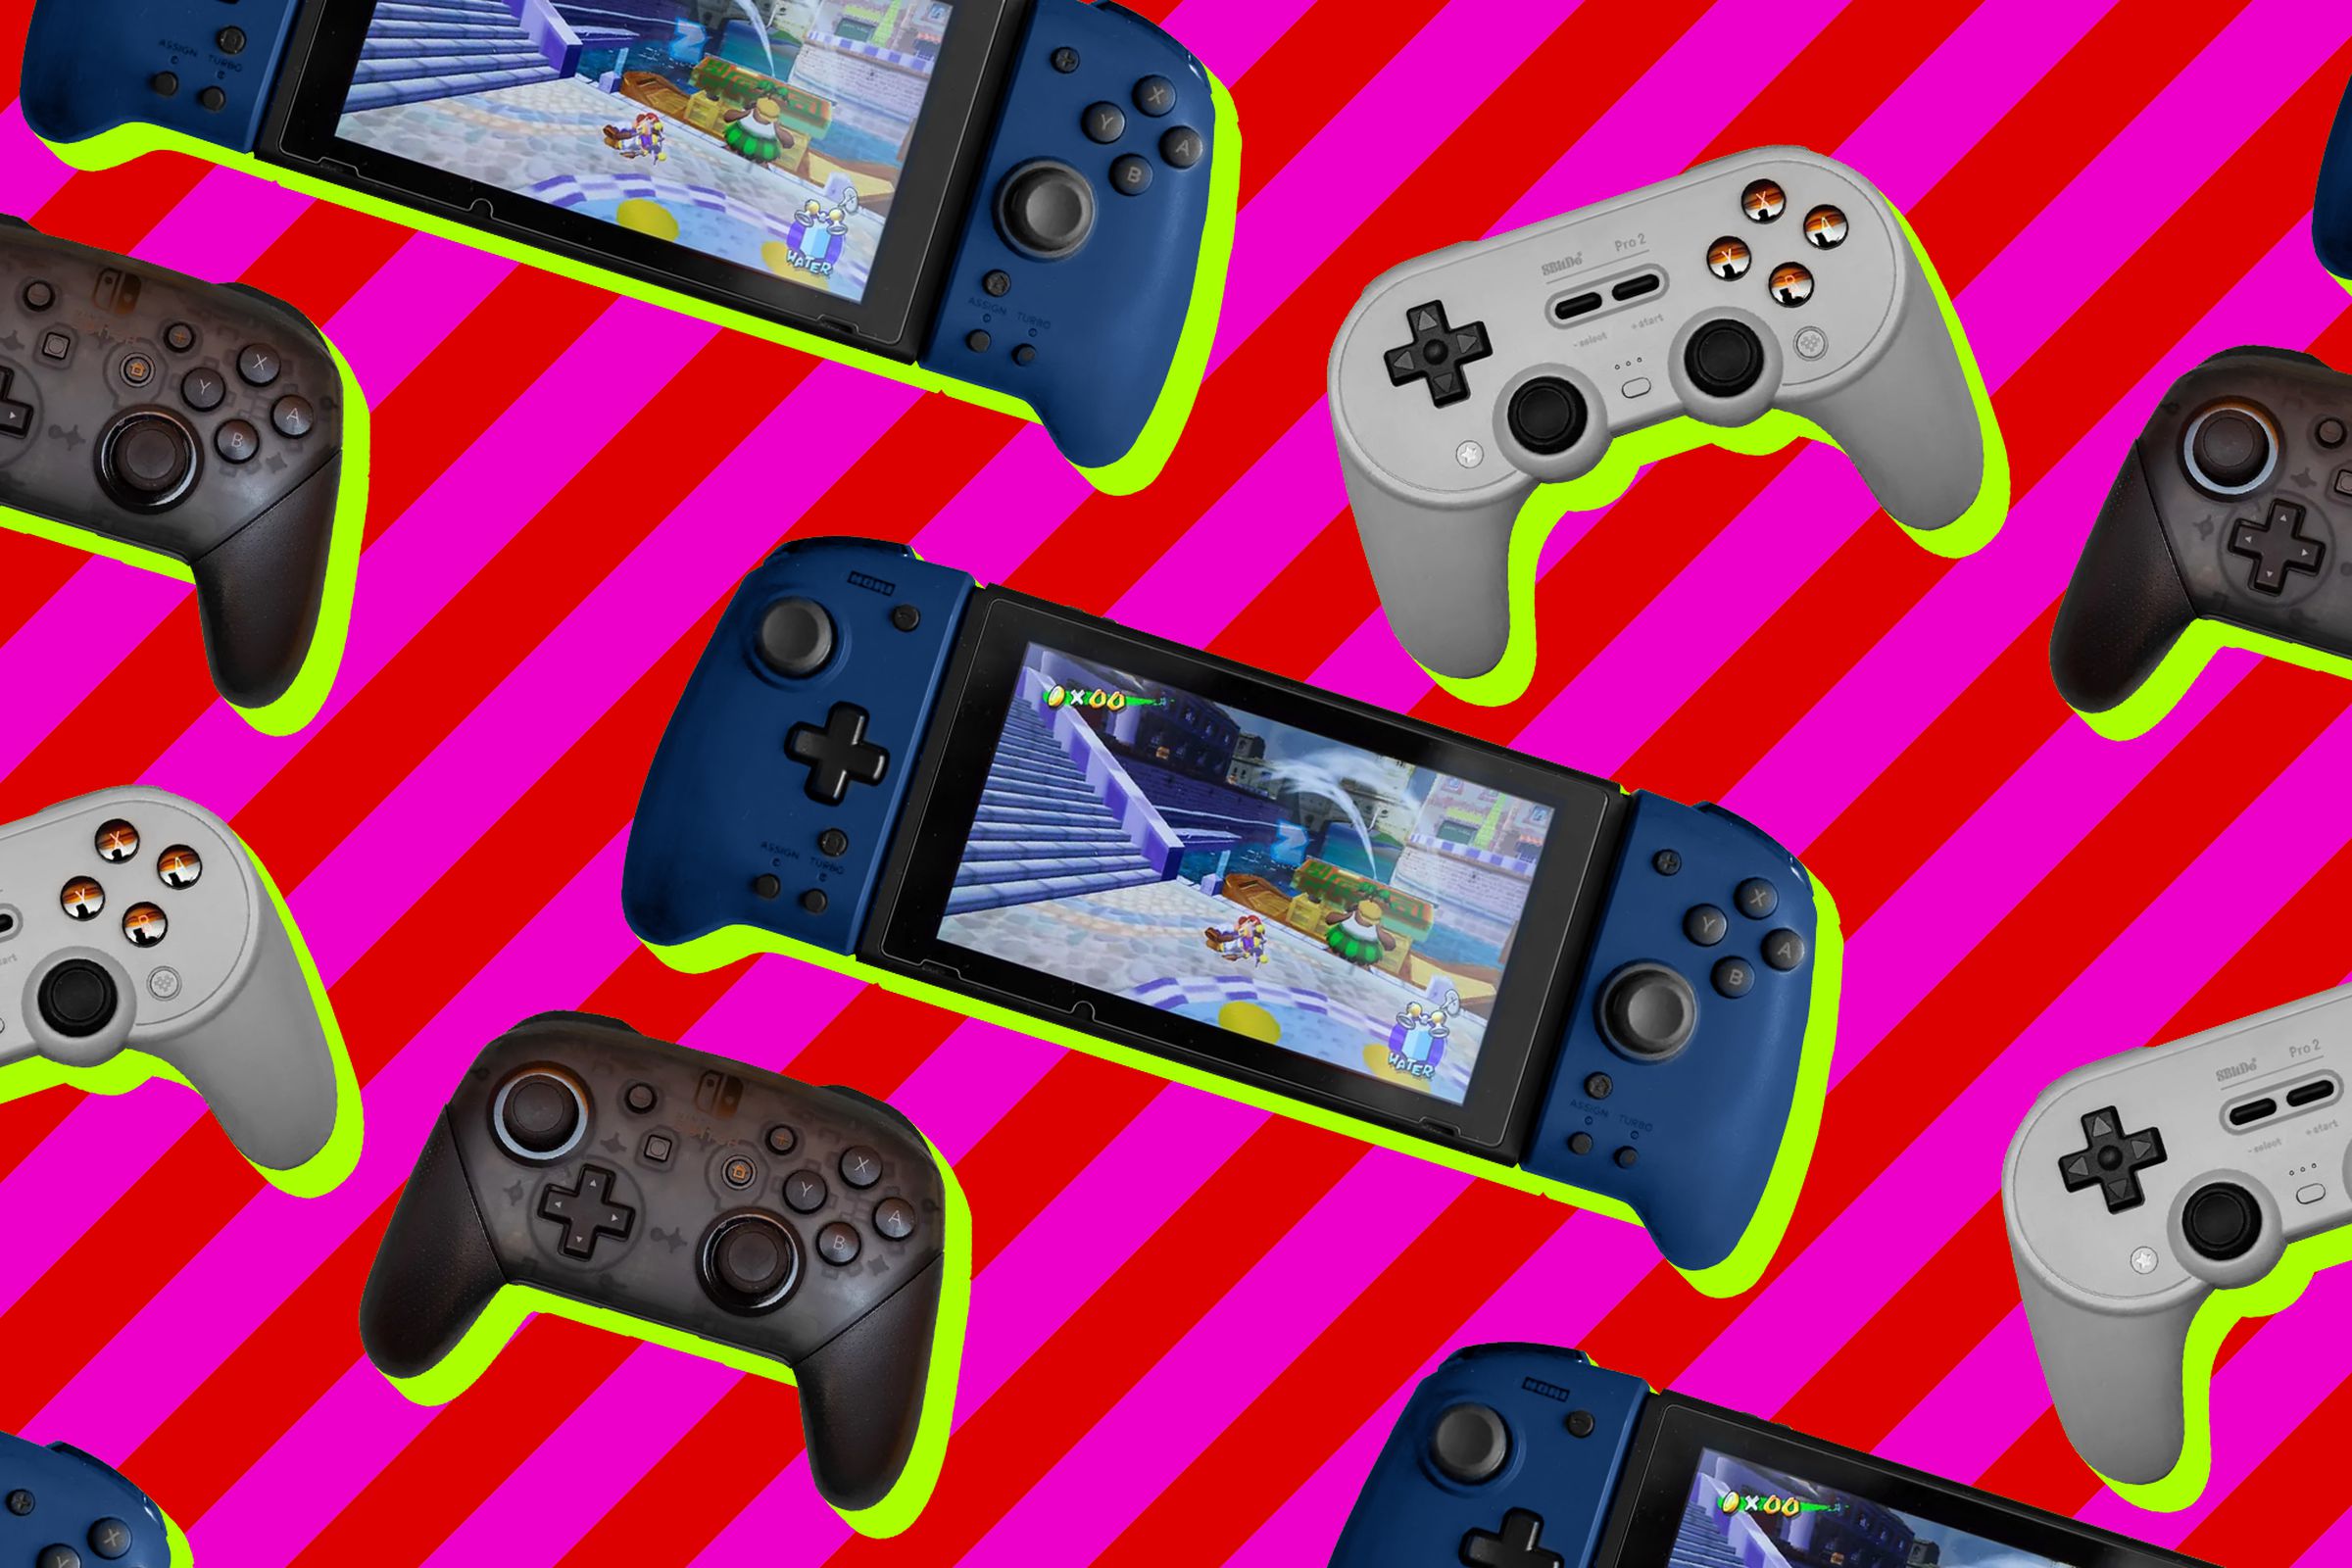 Photocollage of a variety of Nintendo Switch controllers.